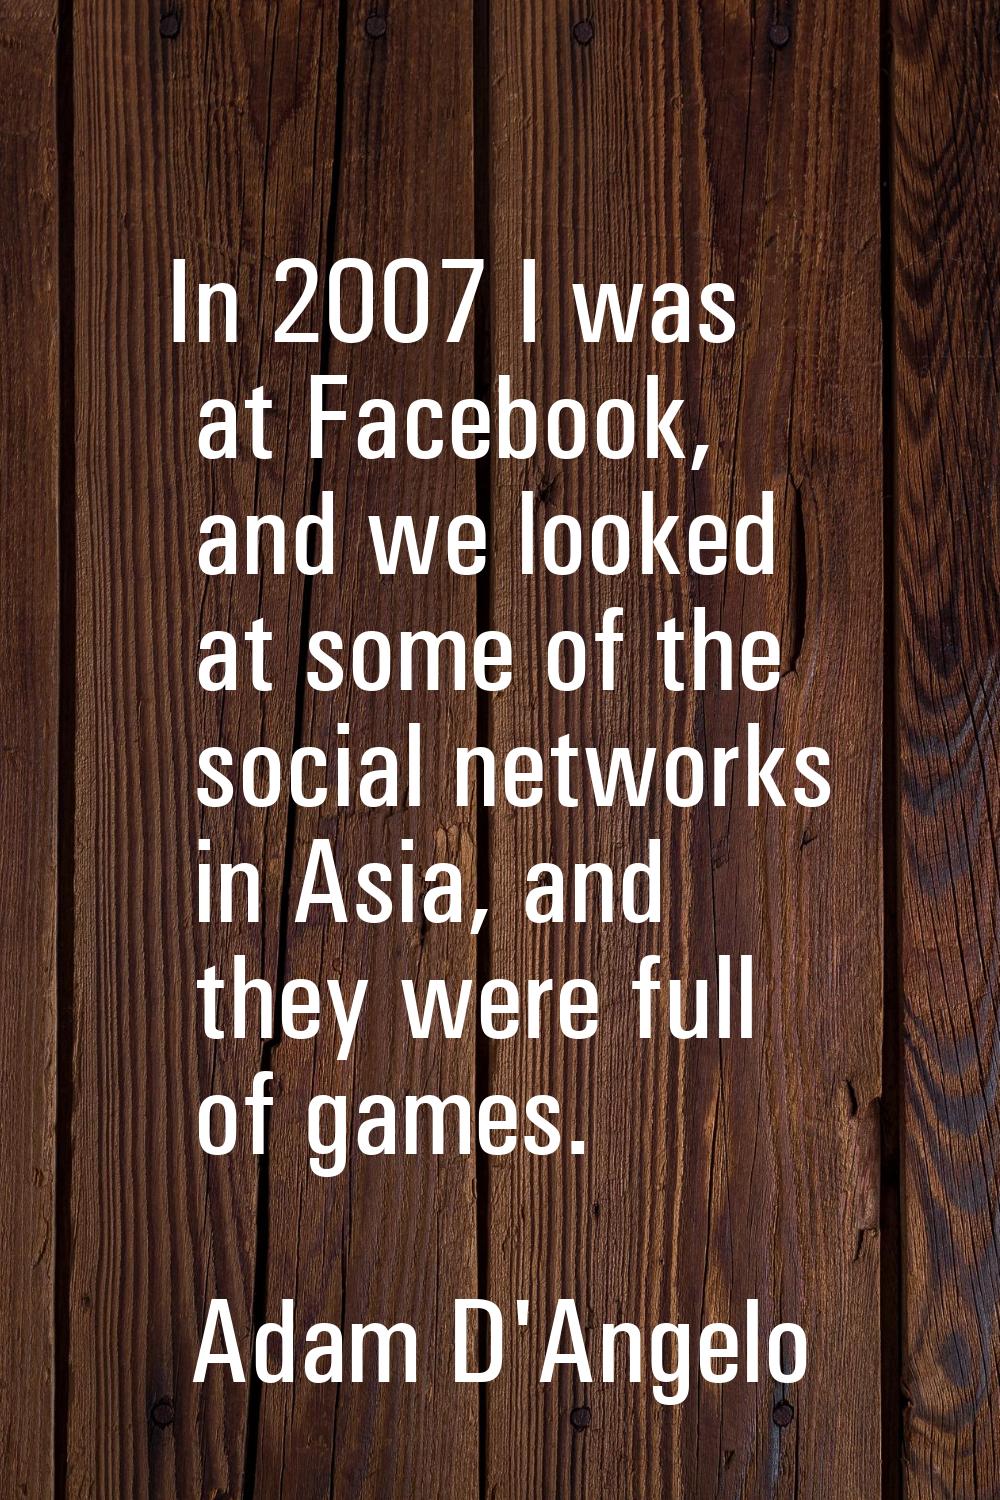 In 2007 I was at Facebook, and we looked at some of the social networks in Asia, and they were full